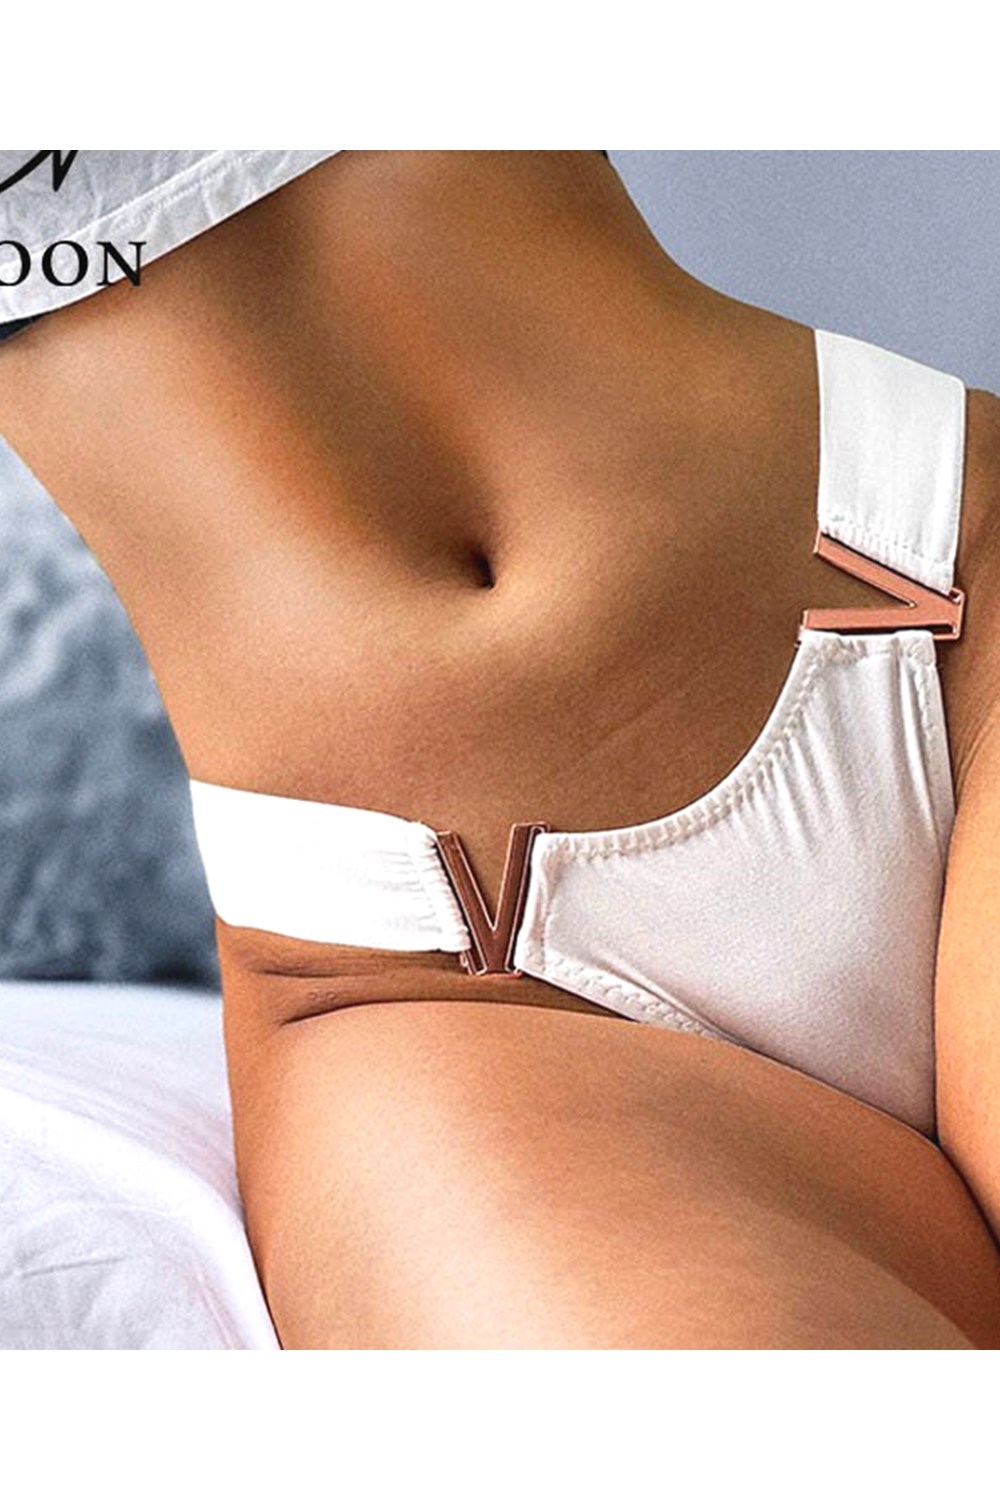 Sexy Panties With V Shaped Metal Decoration For Women Low Waist Underpant  Hollow Out Female Underwear G String Seamless Lingerie From Jacky0817,  $3.69